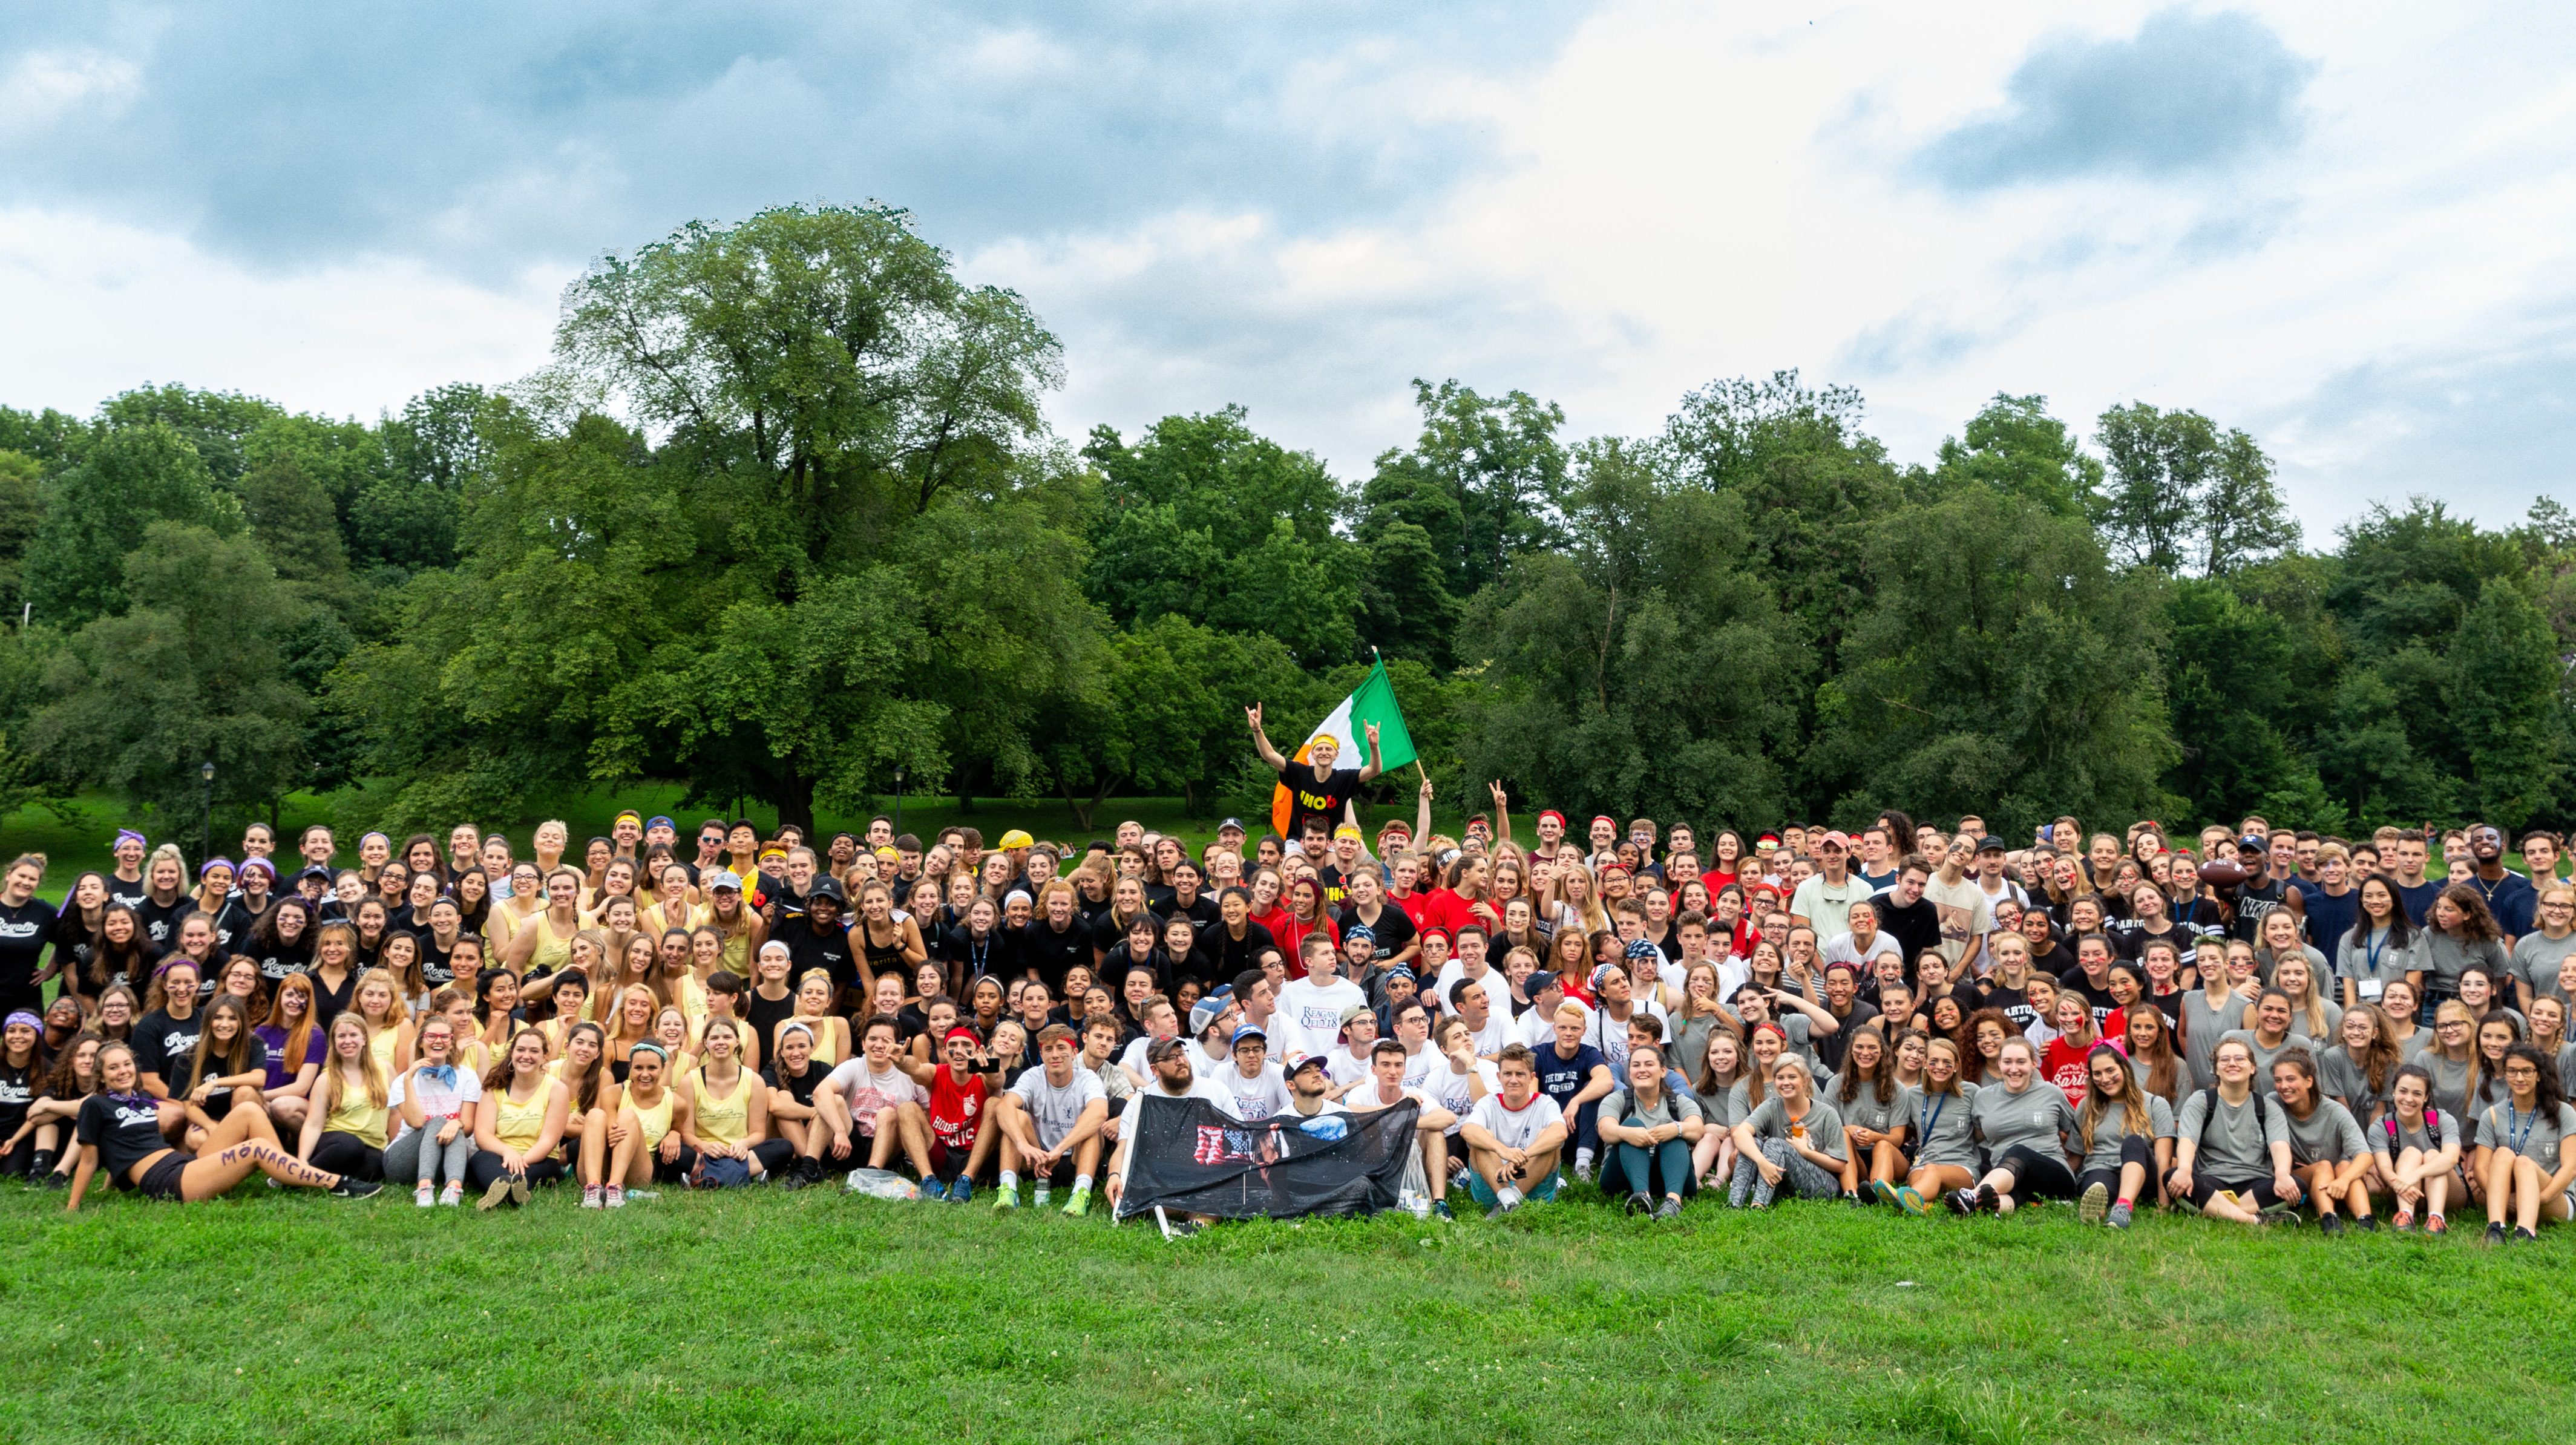 The King's College Student Body at the Great Race